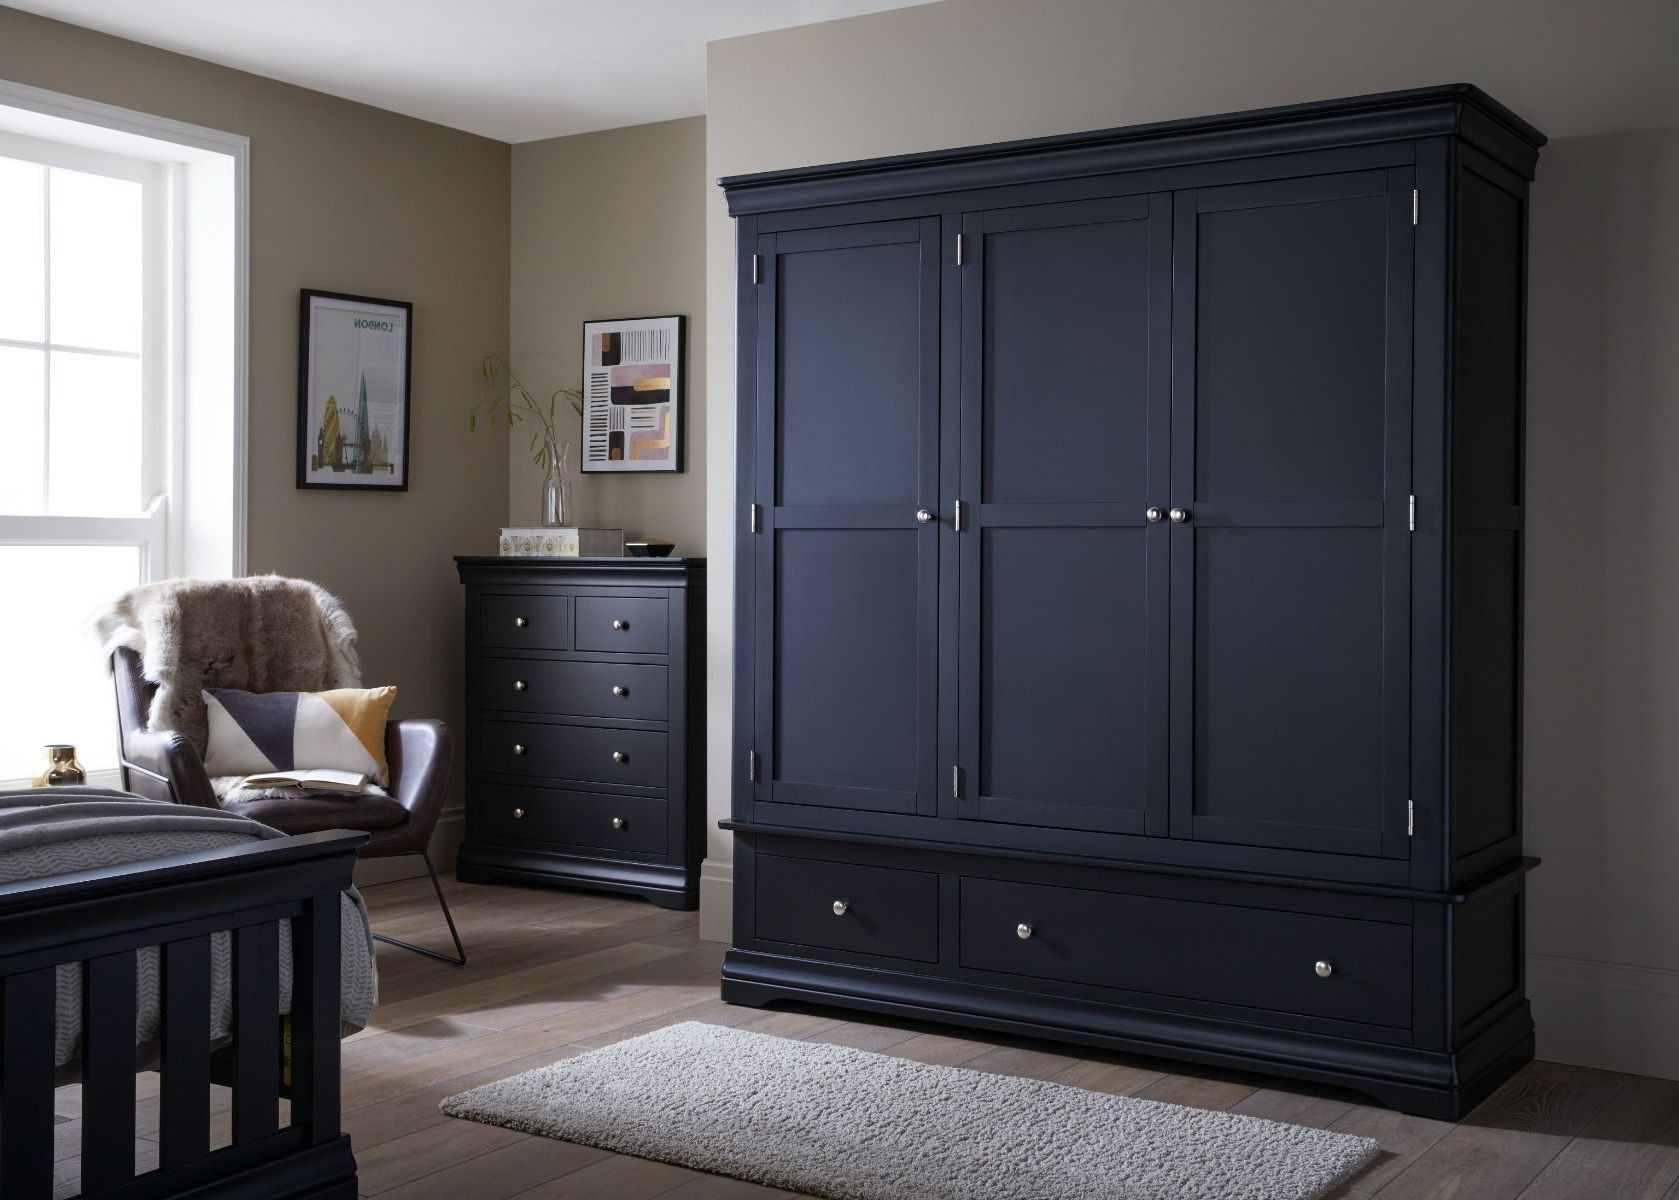 Toulouse Black Painted Large Triple Wardrobe With Drawer In Black Wardrobes (Gallery 11 of 20)